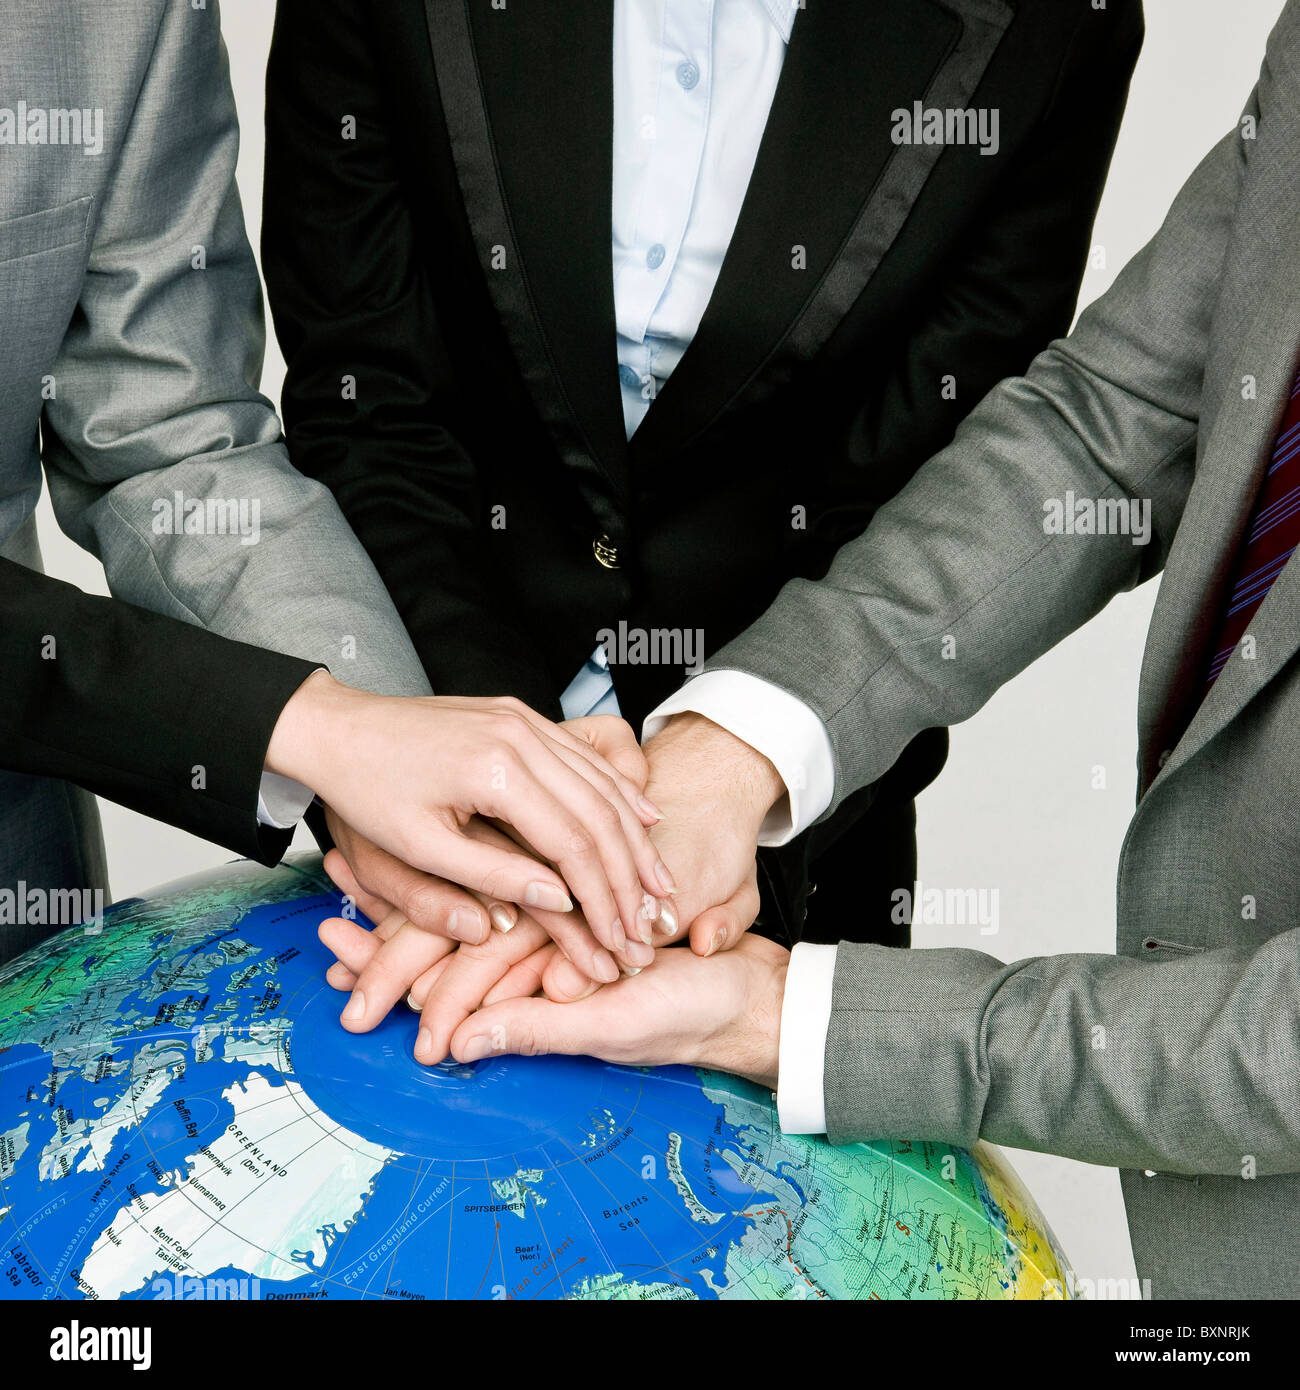 Four business people overlapping hands over globe, elevated view Stock Photo